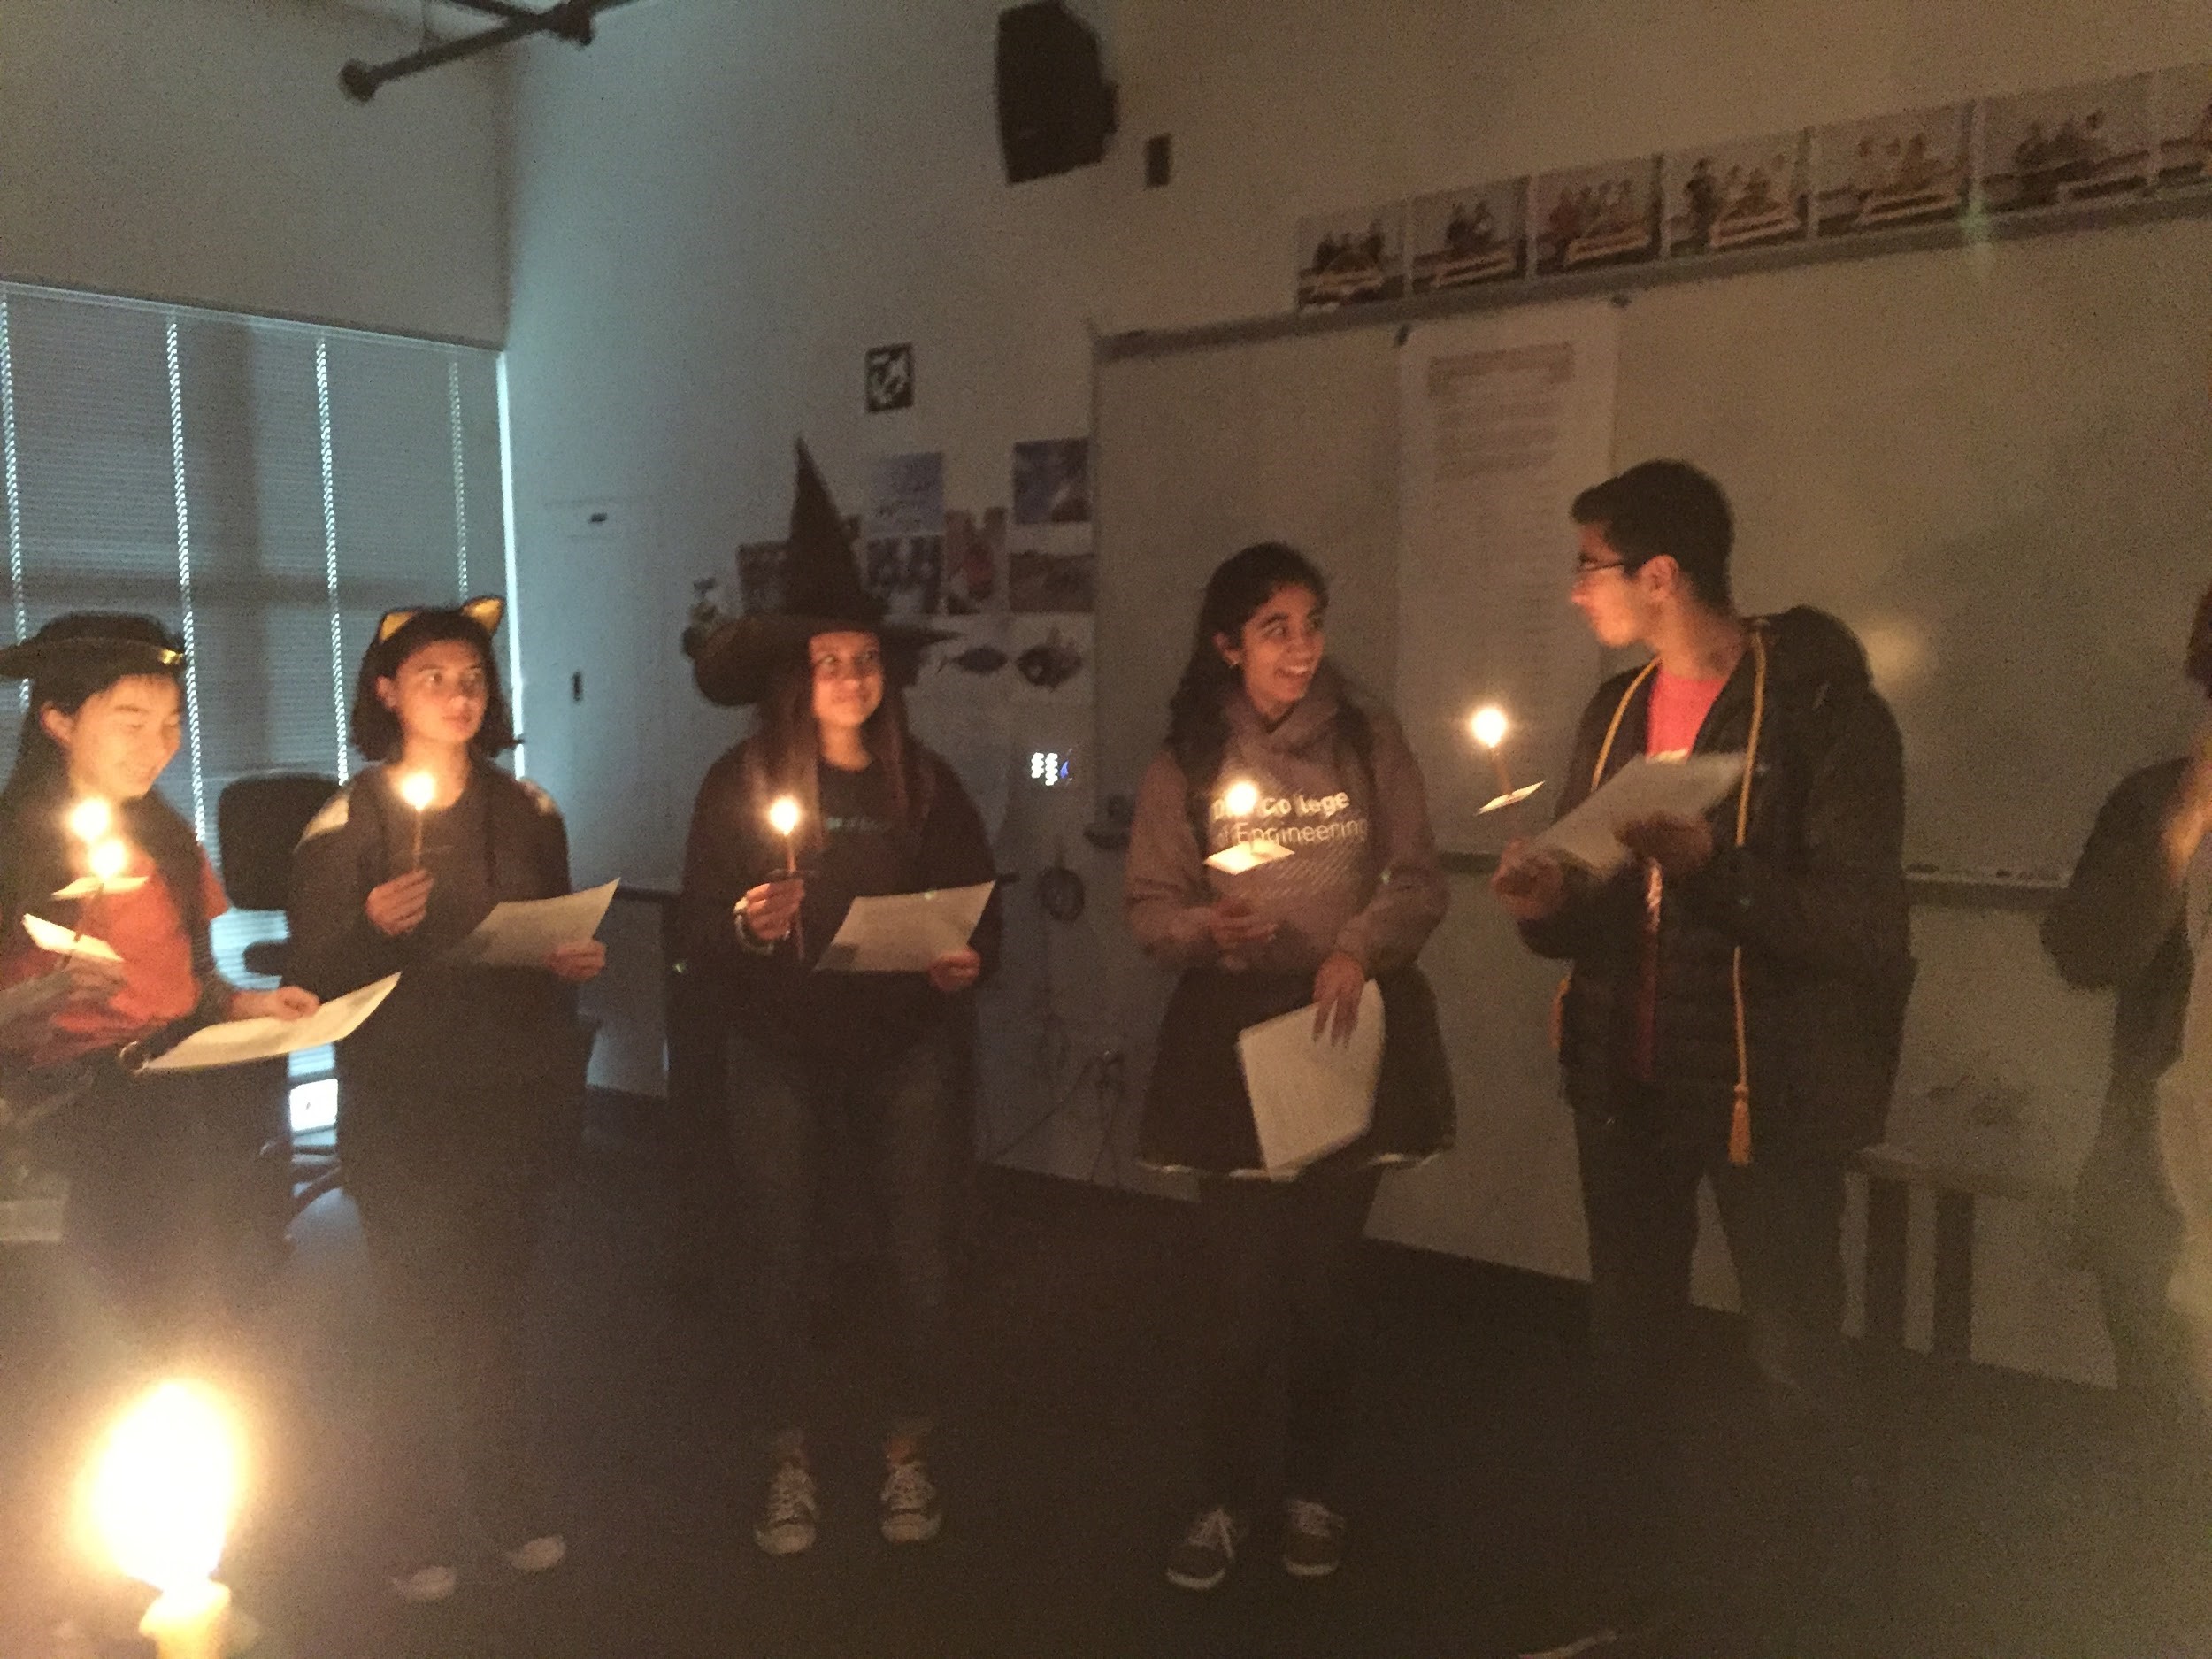 Students wearing costumes and holding lights in a dark classroom.